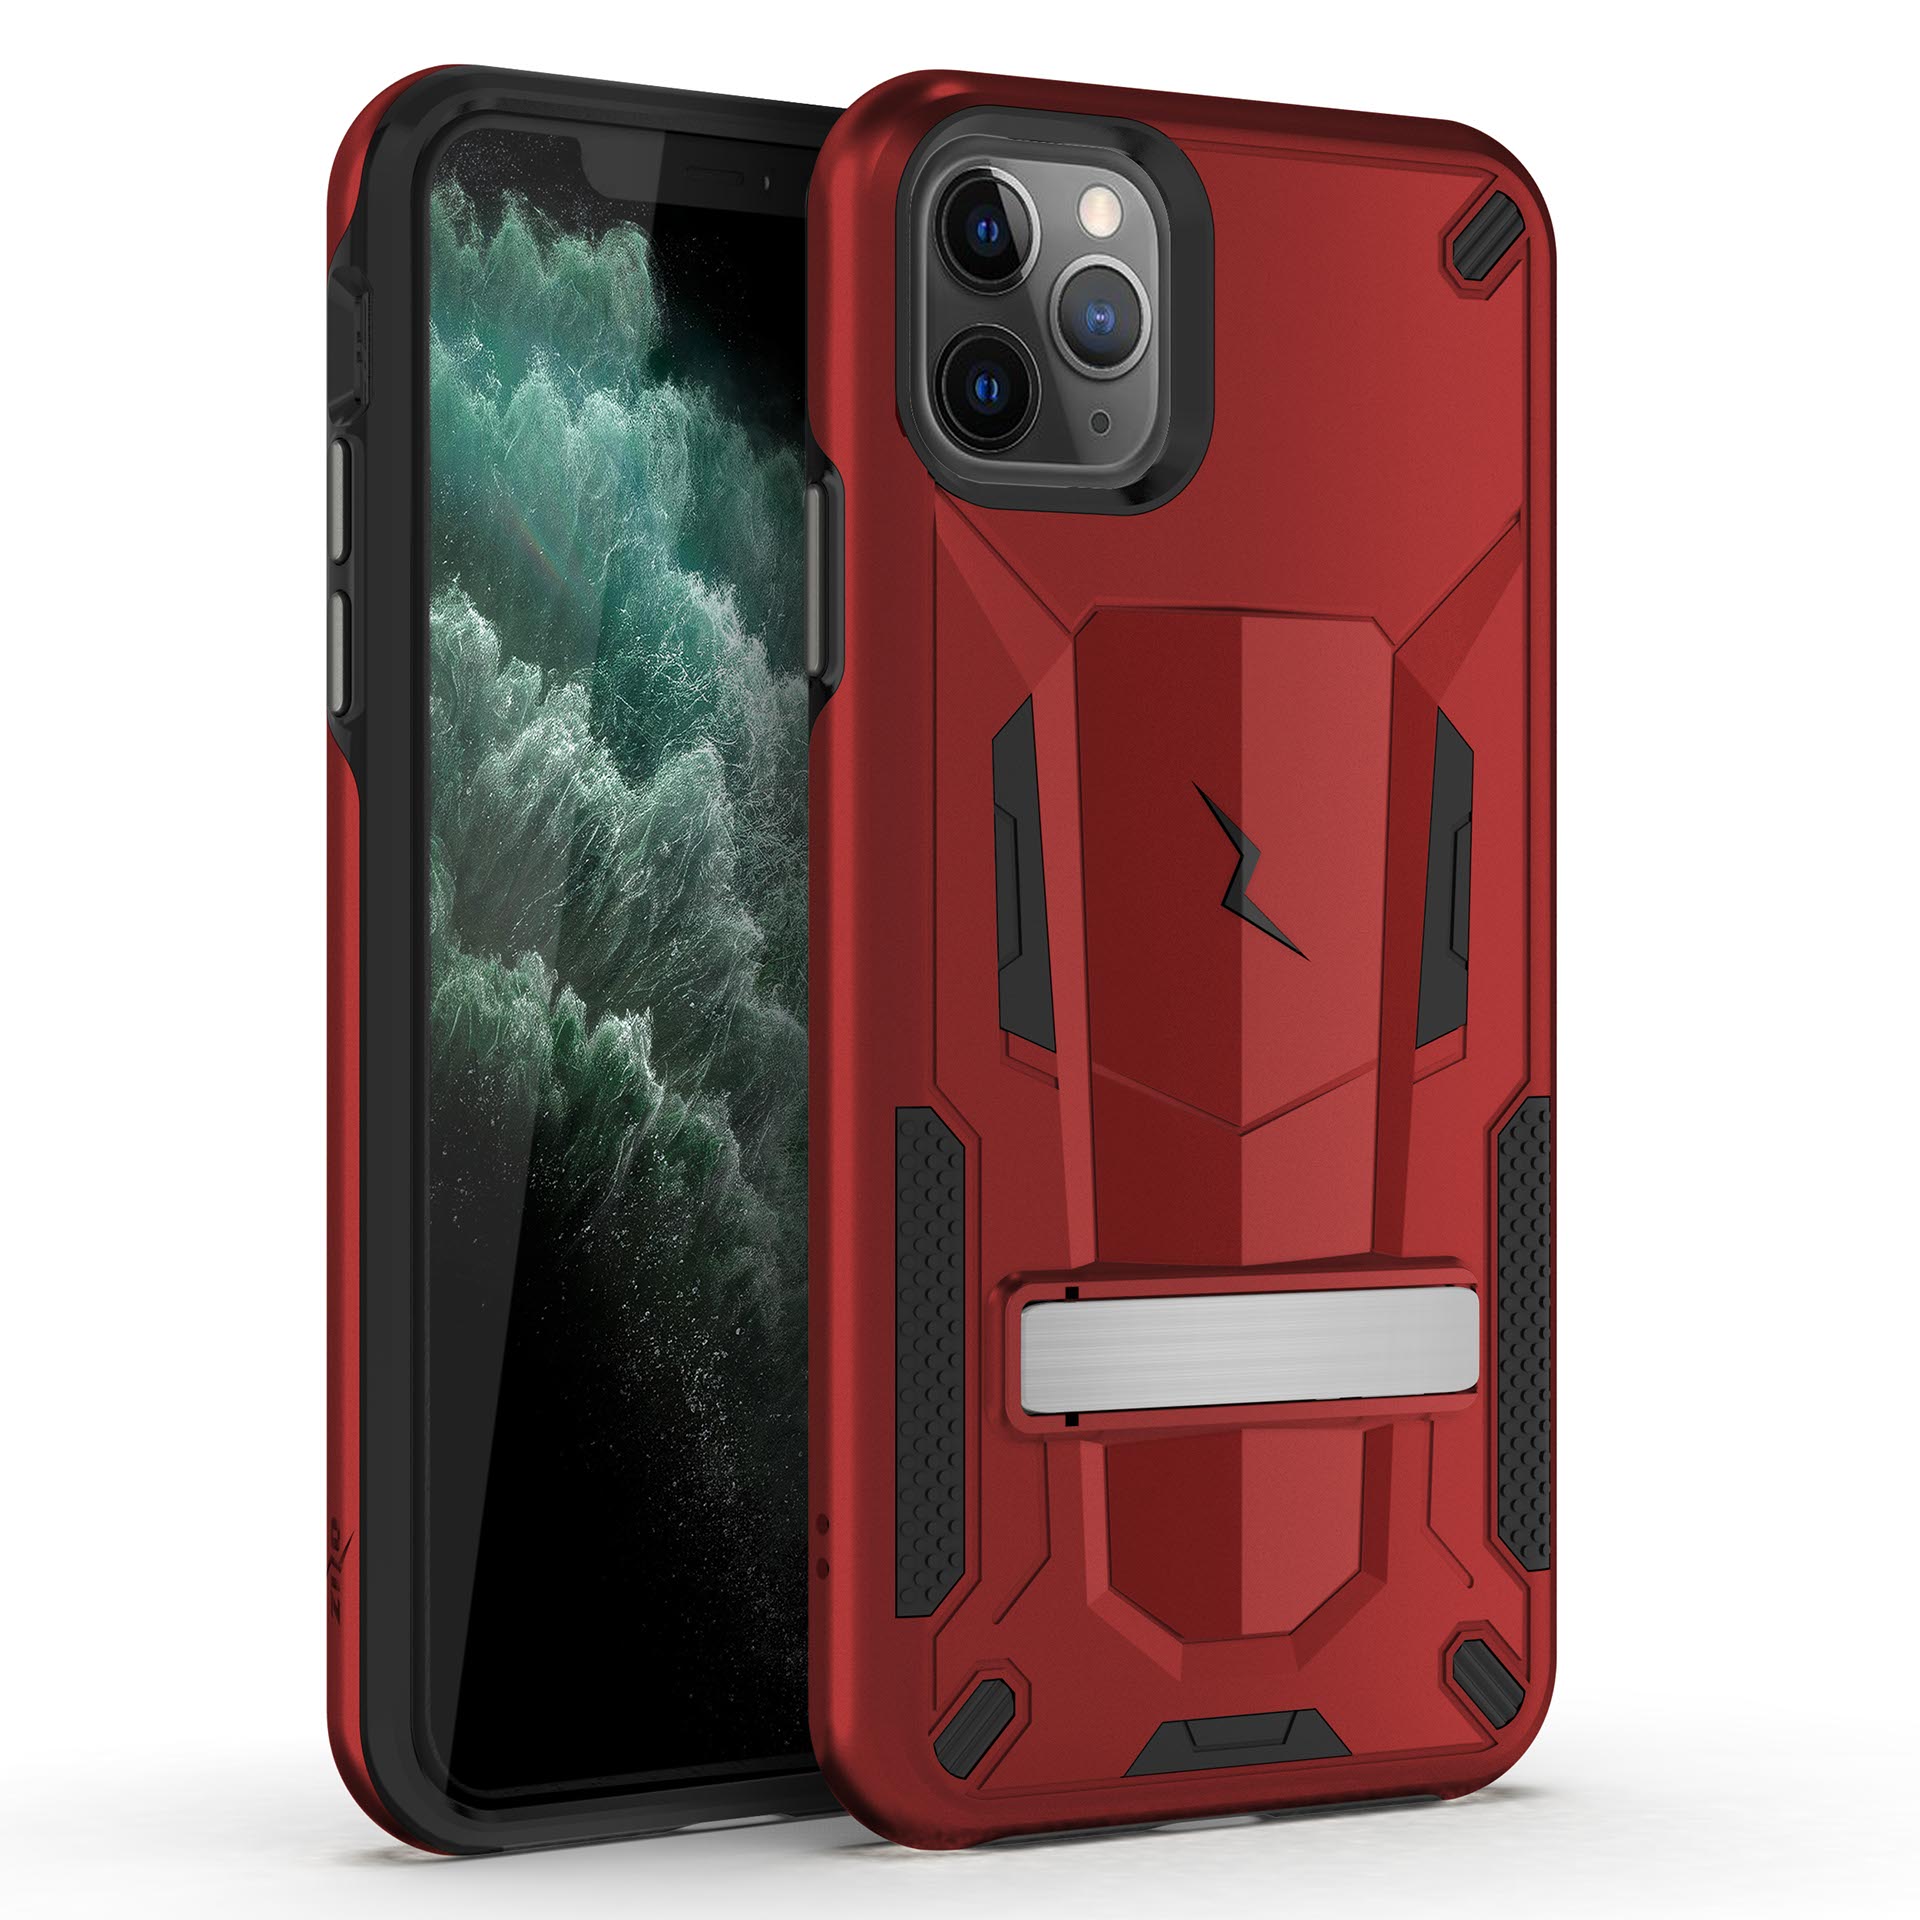 IPHONE 11 PRO MAX ZIZO TRANSFORM CASE W/ BUILT-IN KICKSTAND - RED (9932)